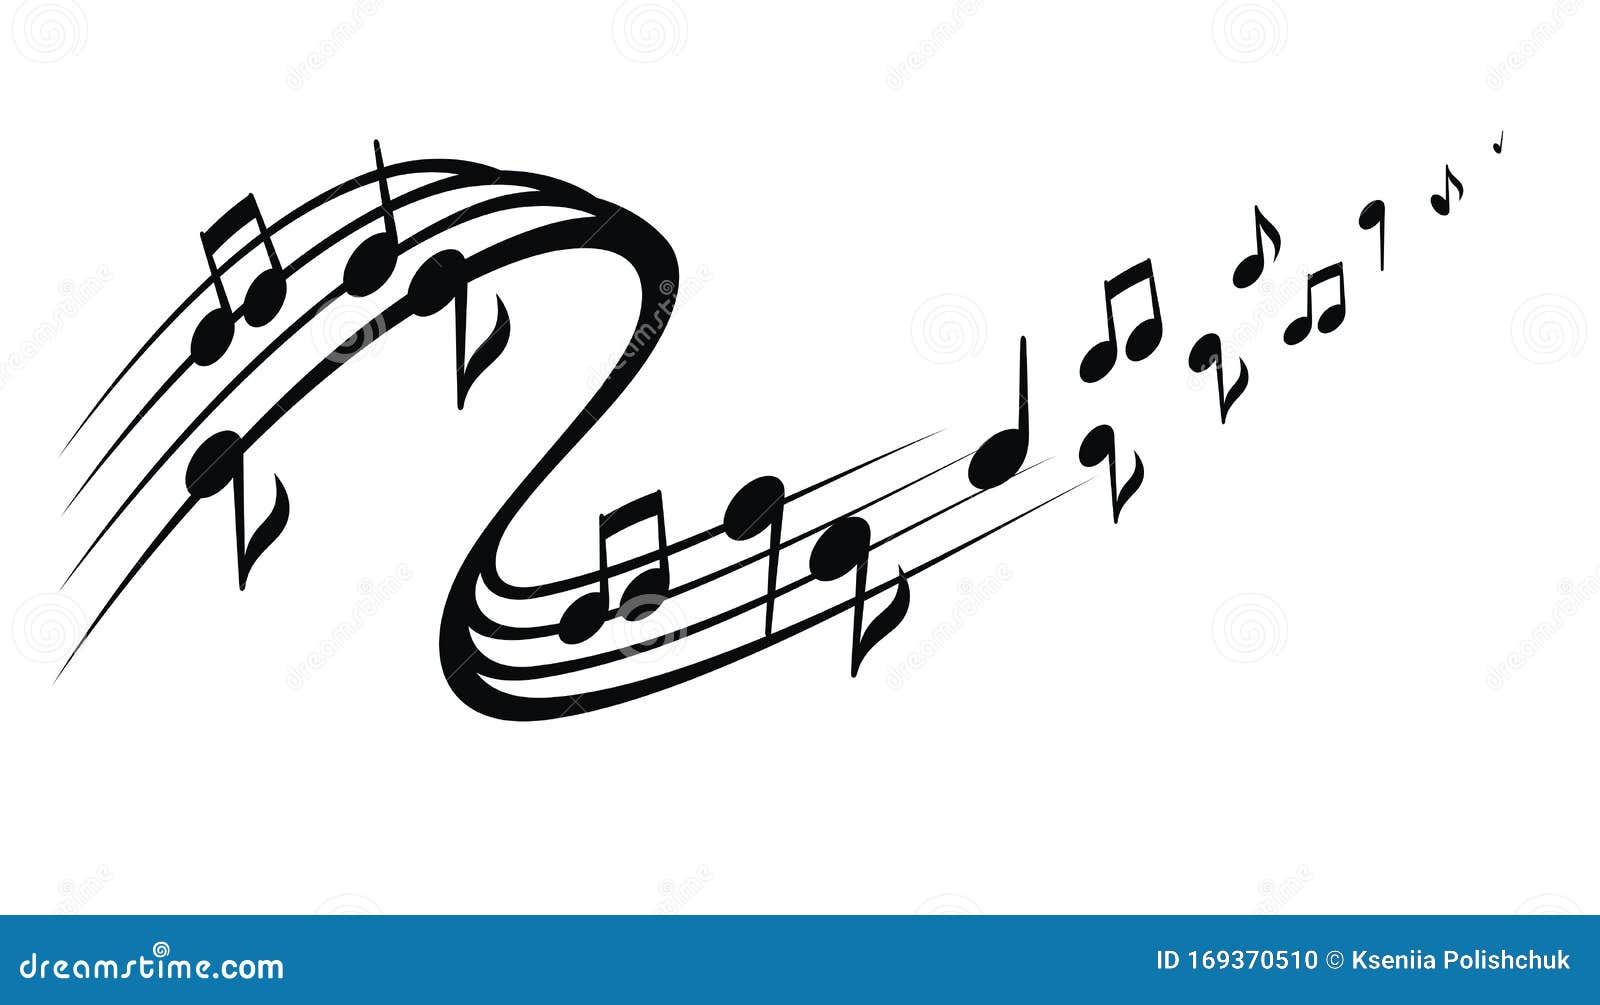 Decorative Tattoo Music Notes, Musical Design Element, Isolated ...